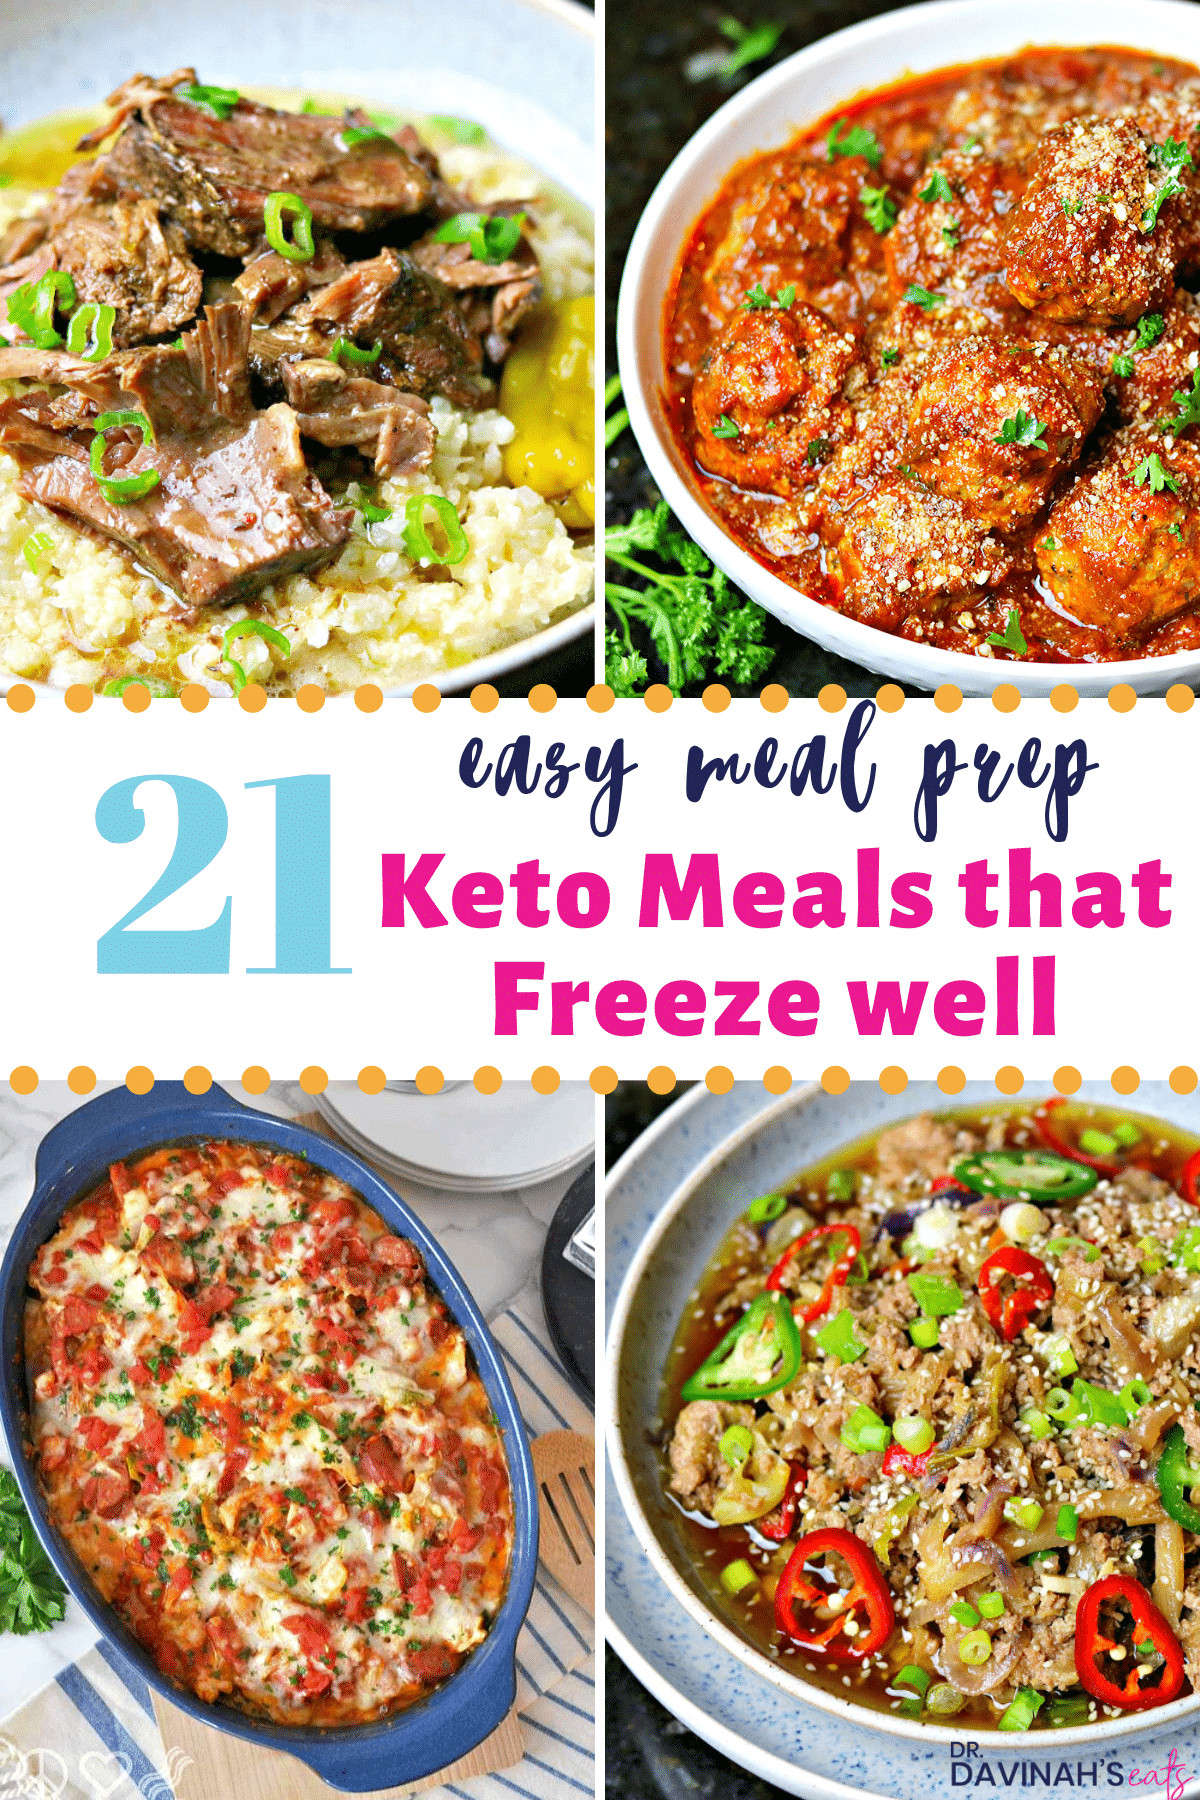 Keto Frozen Dinners
 21 Low Carb Frozen Meals Recipes for Meal Prep